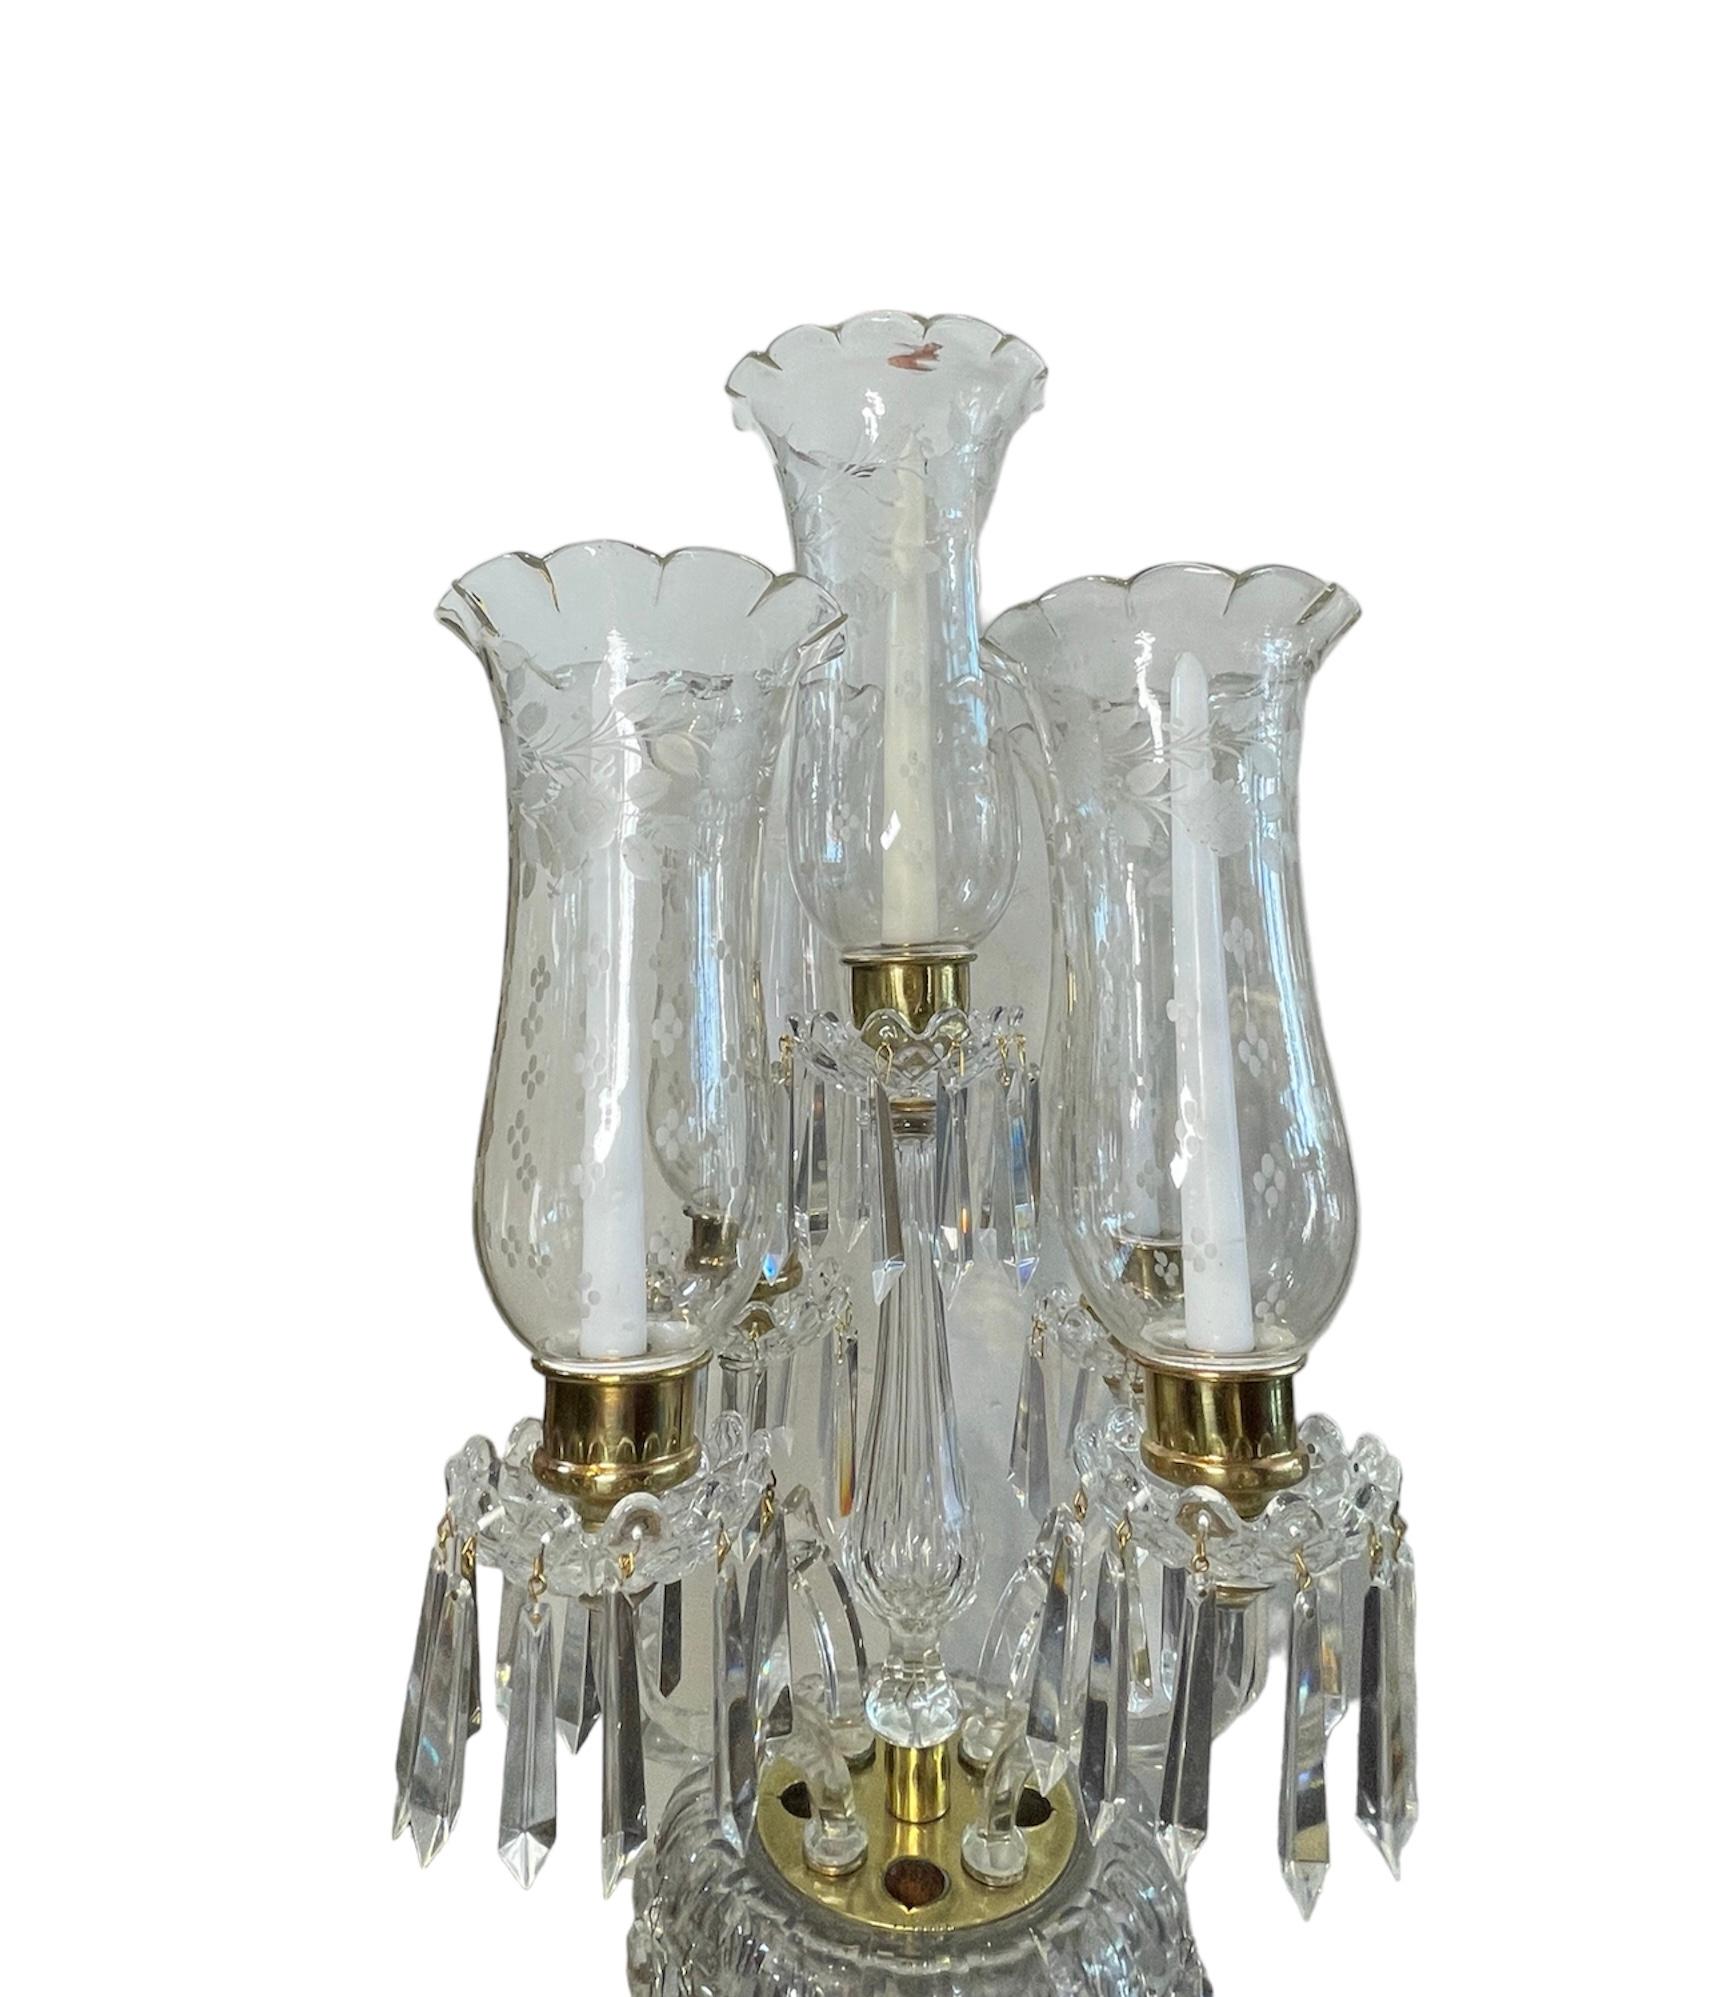 Baccarat Style Five Arms High and Large Crystal Candelabra In Good Condition For Sale In Guaynabo, PR